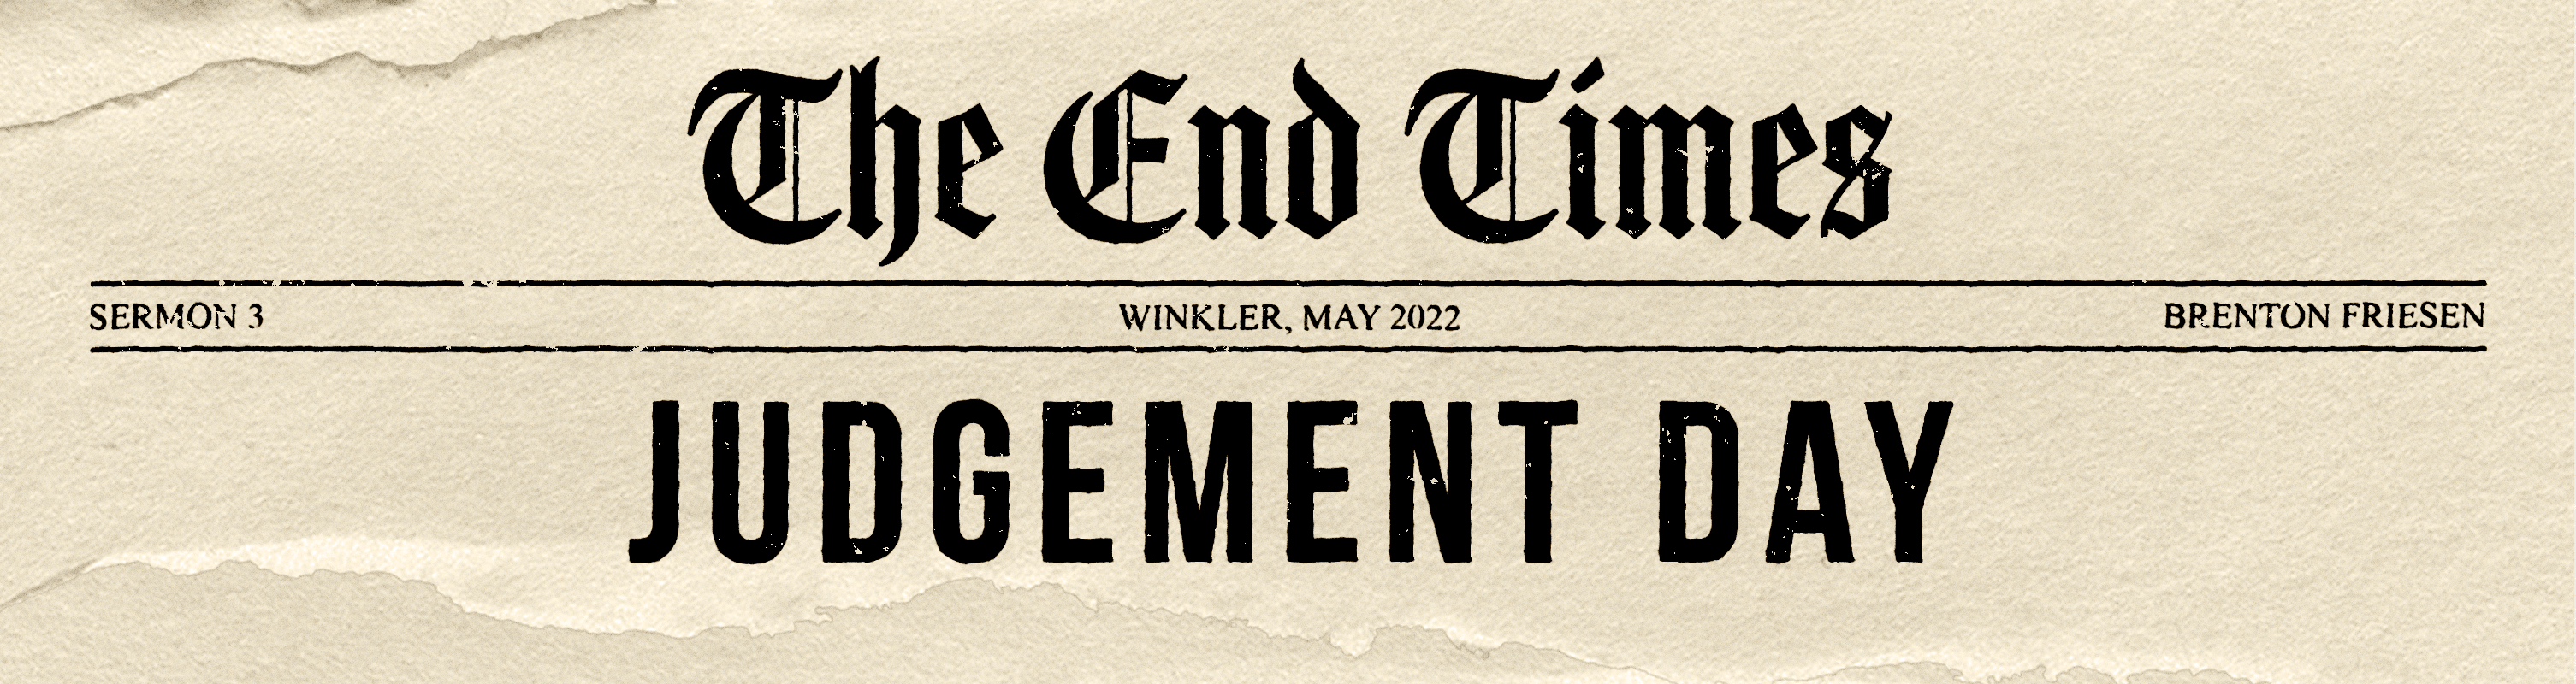 The-End-Times-WEBSITE-1